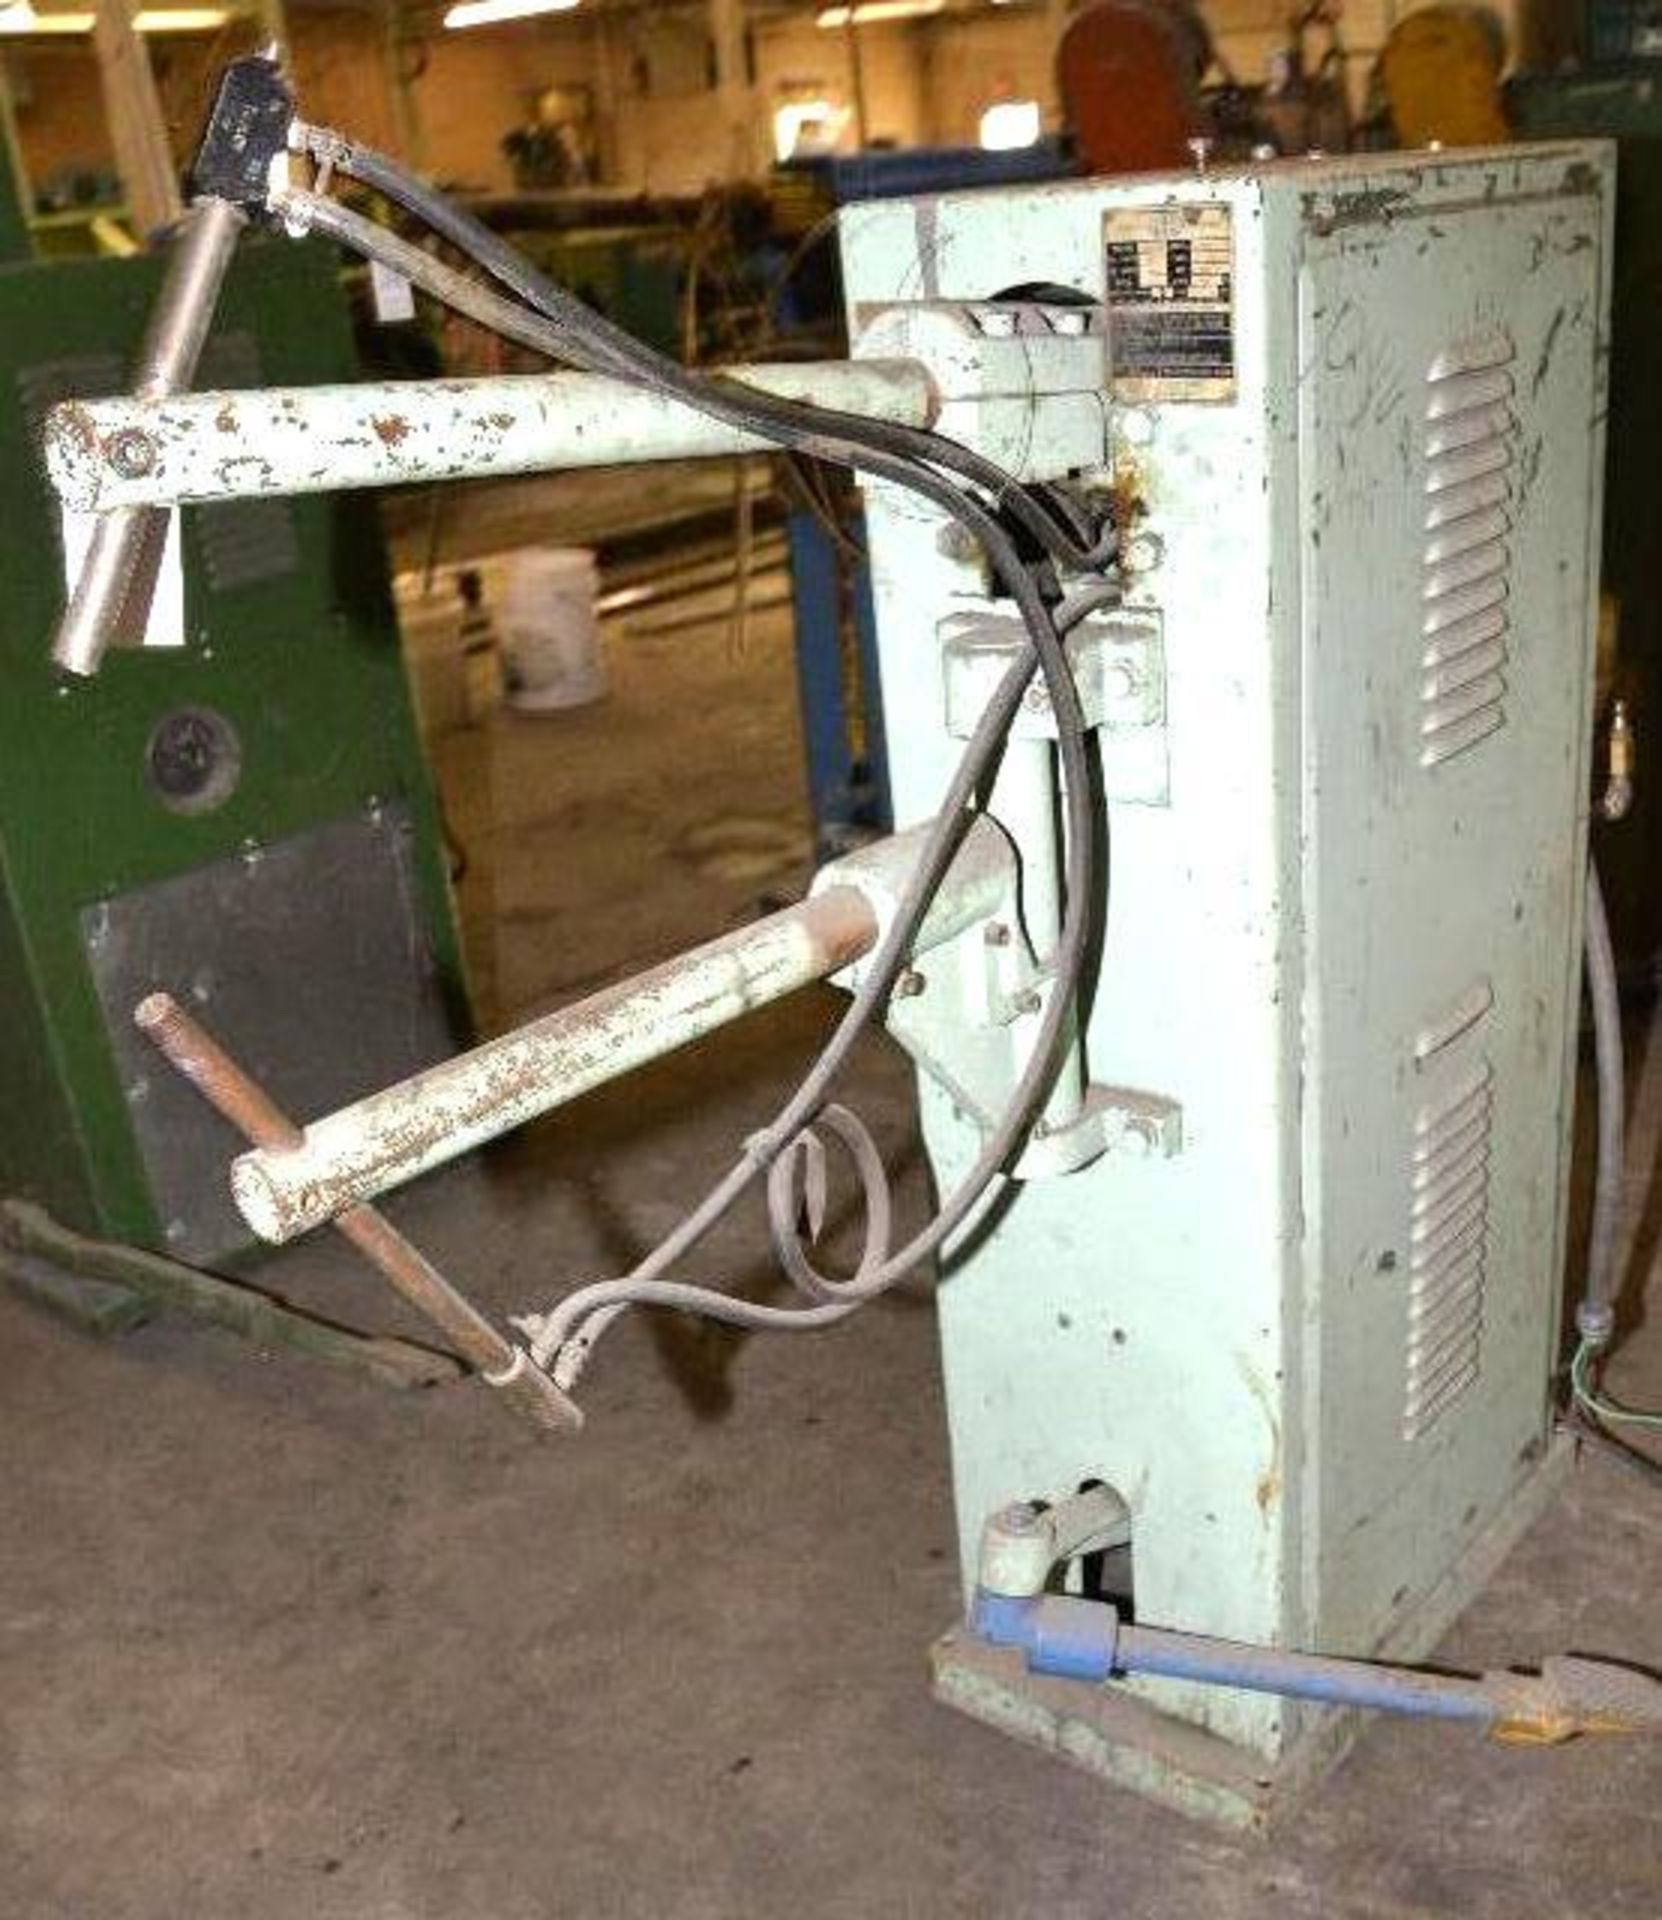 PEER SPOT WELDER - MD. FR-410 S/N: 13780 - 230 VOLTS- FREQUENCY 60- SECC.VOLTS.2.0 TO 3.2 - KBA 10 - Image 3 of 5